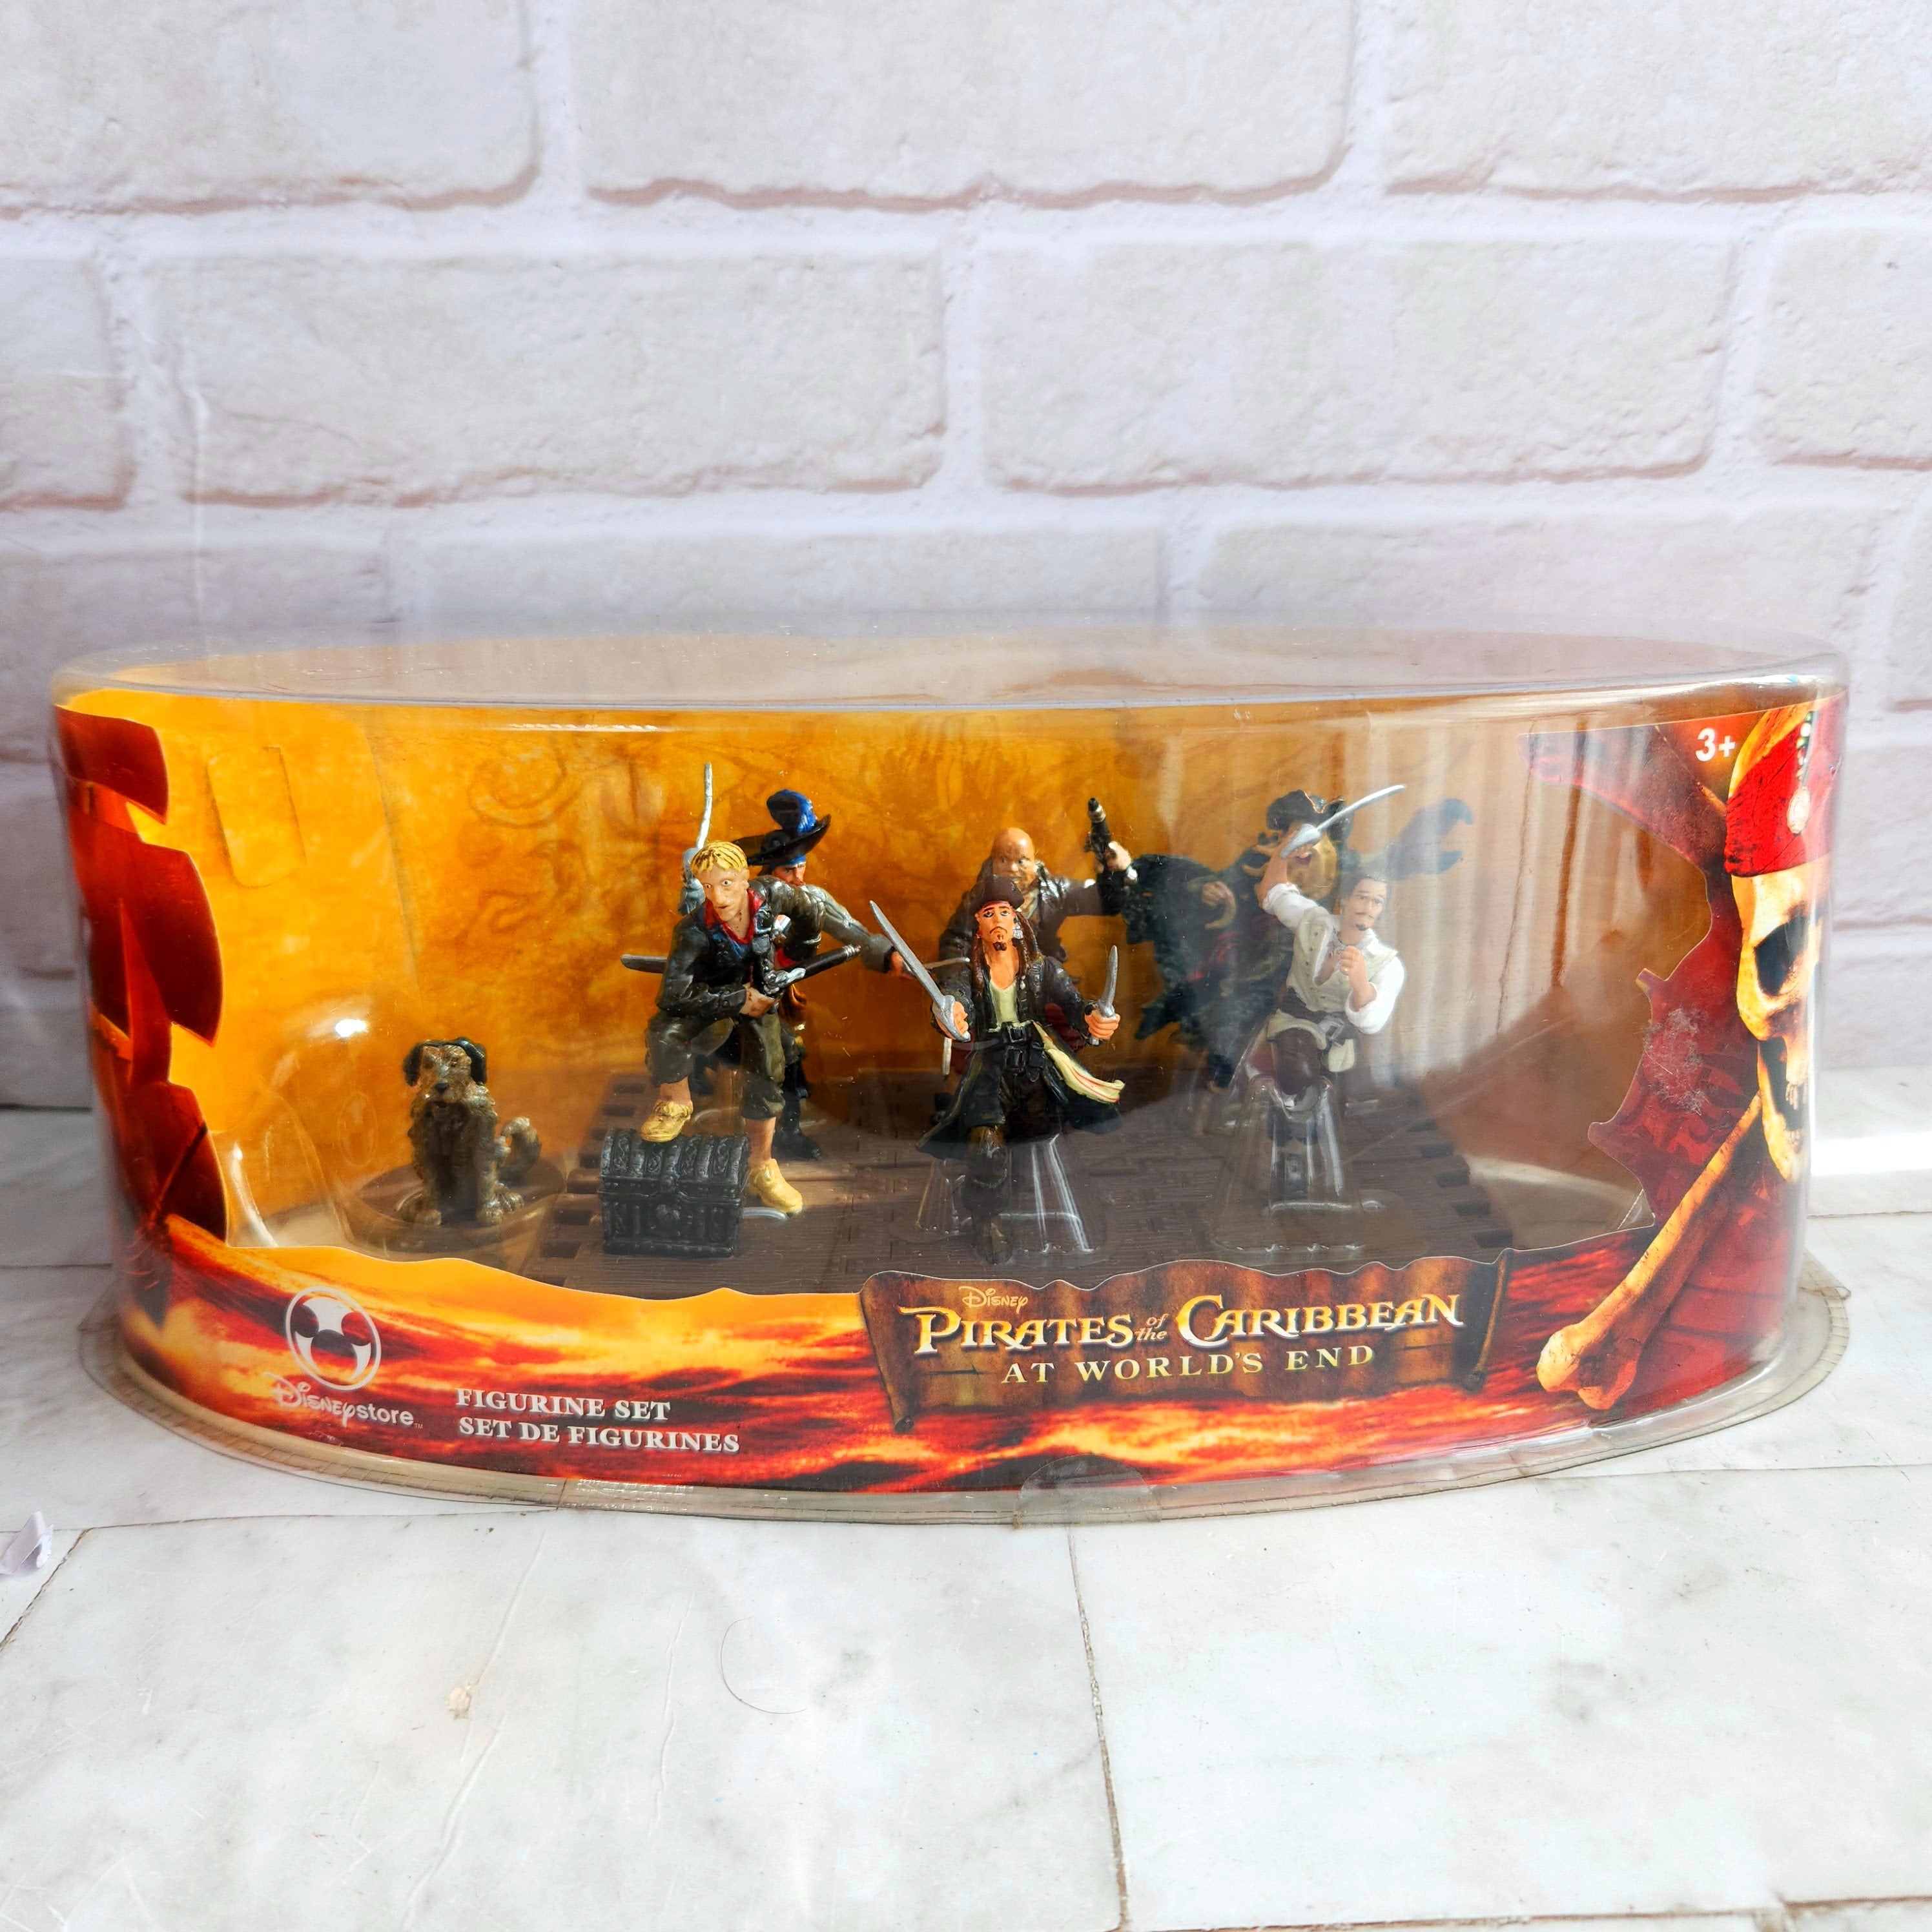 Pirates Of The Carribean At World's End Figure Set - New Sealed